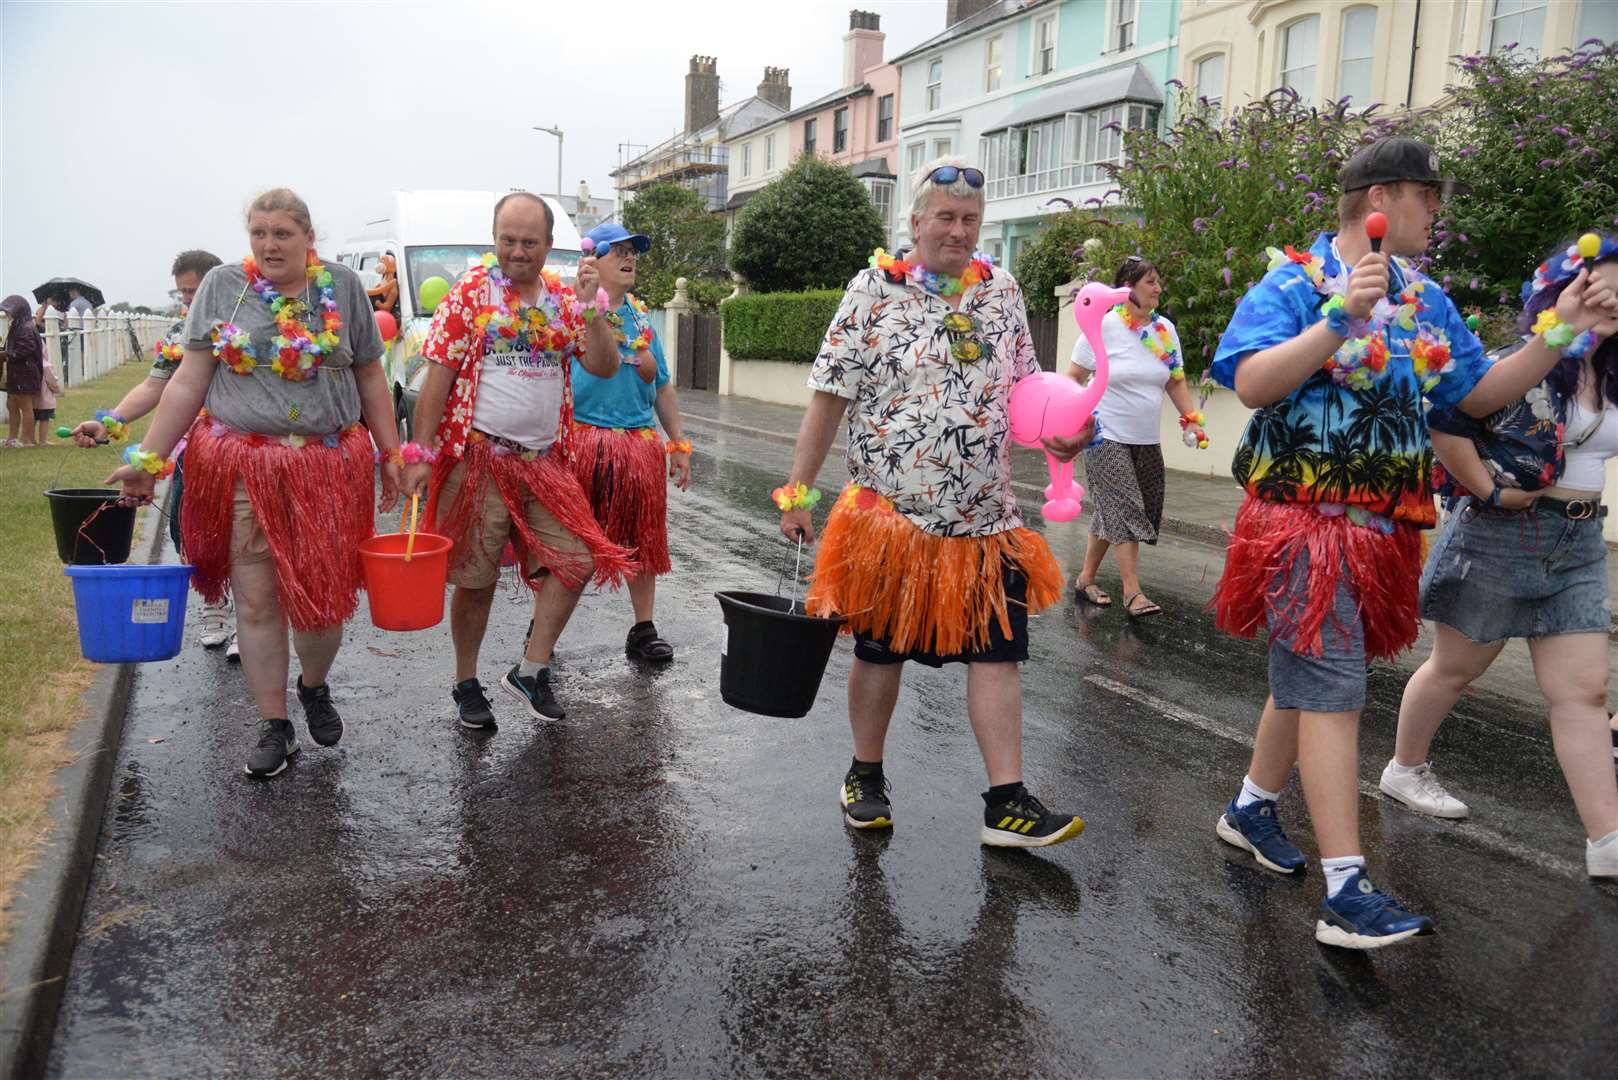 Whatever the weather, the carnival procession will take place